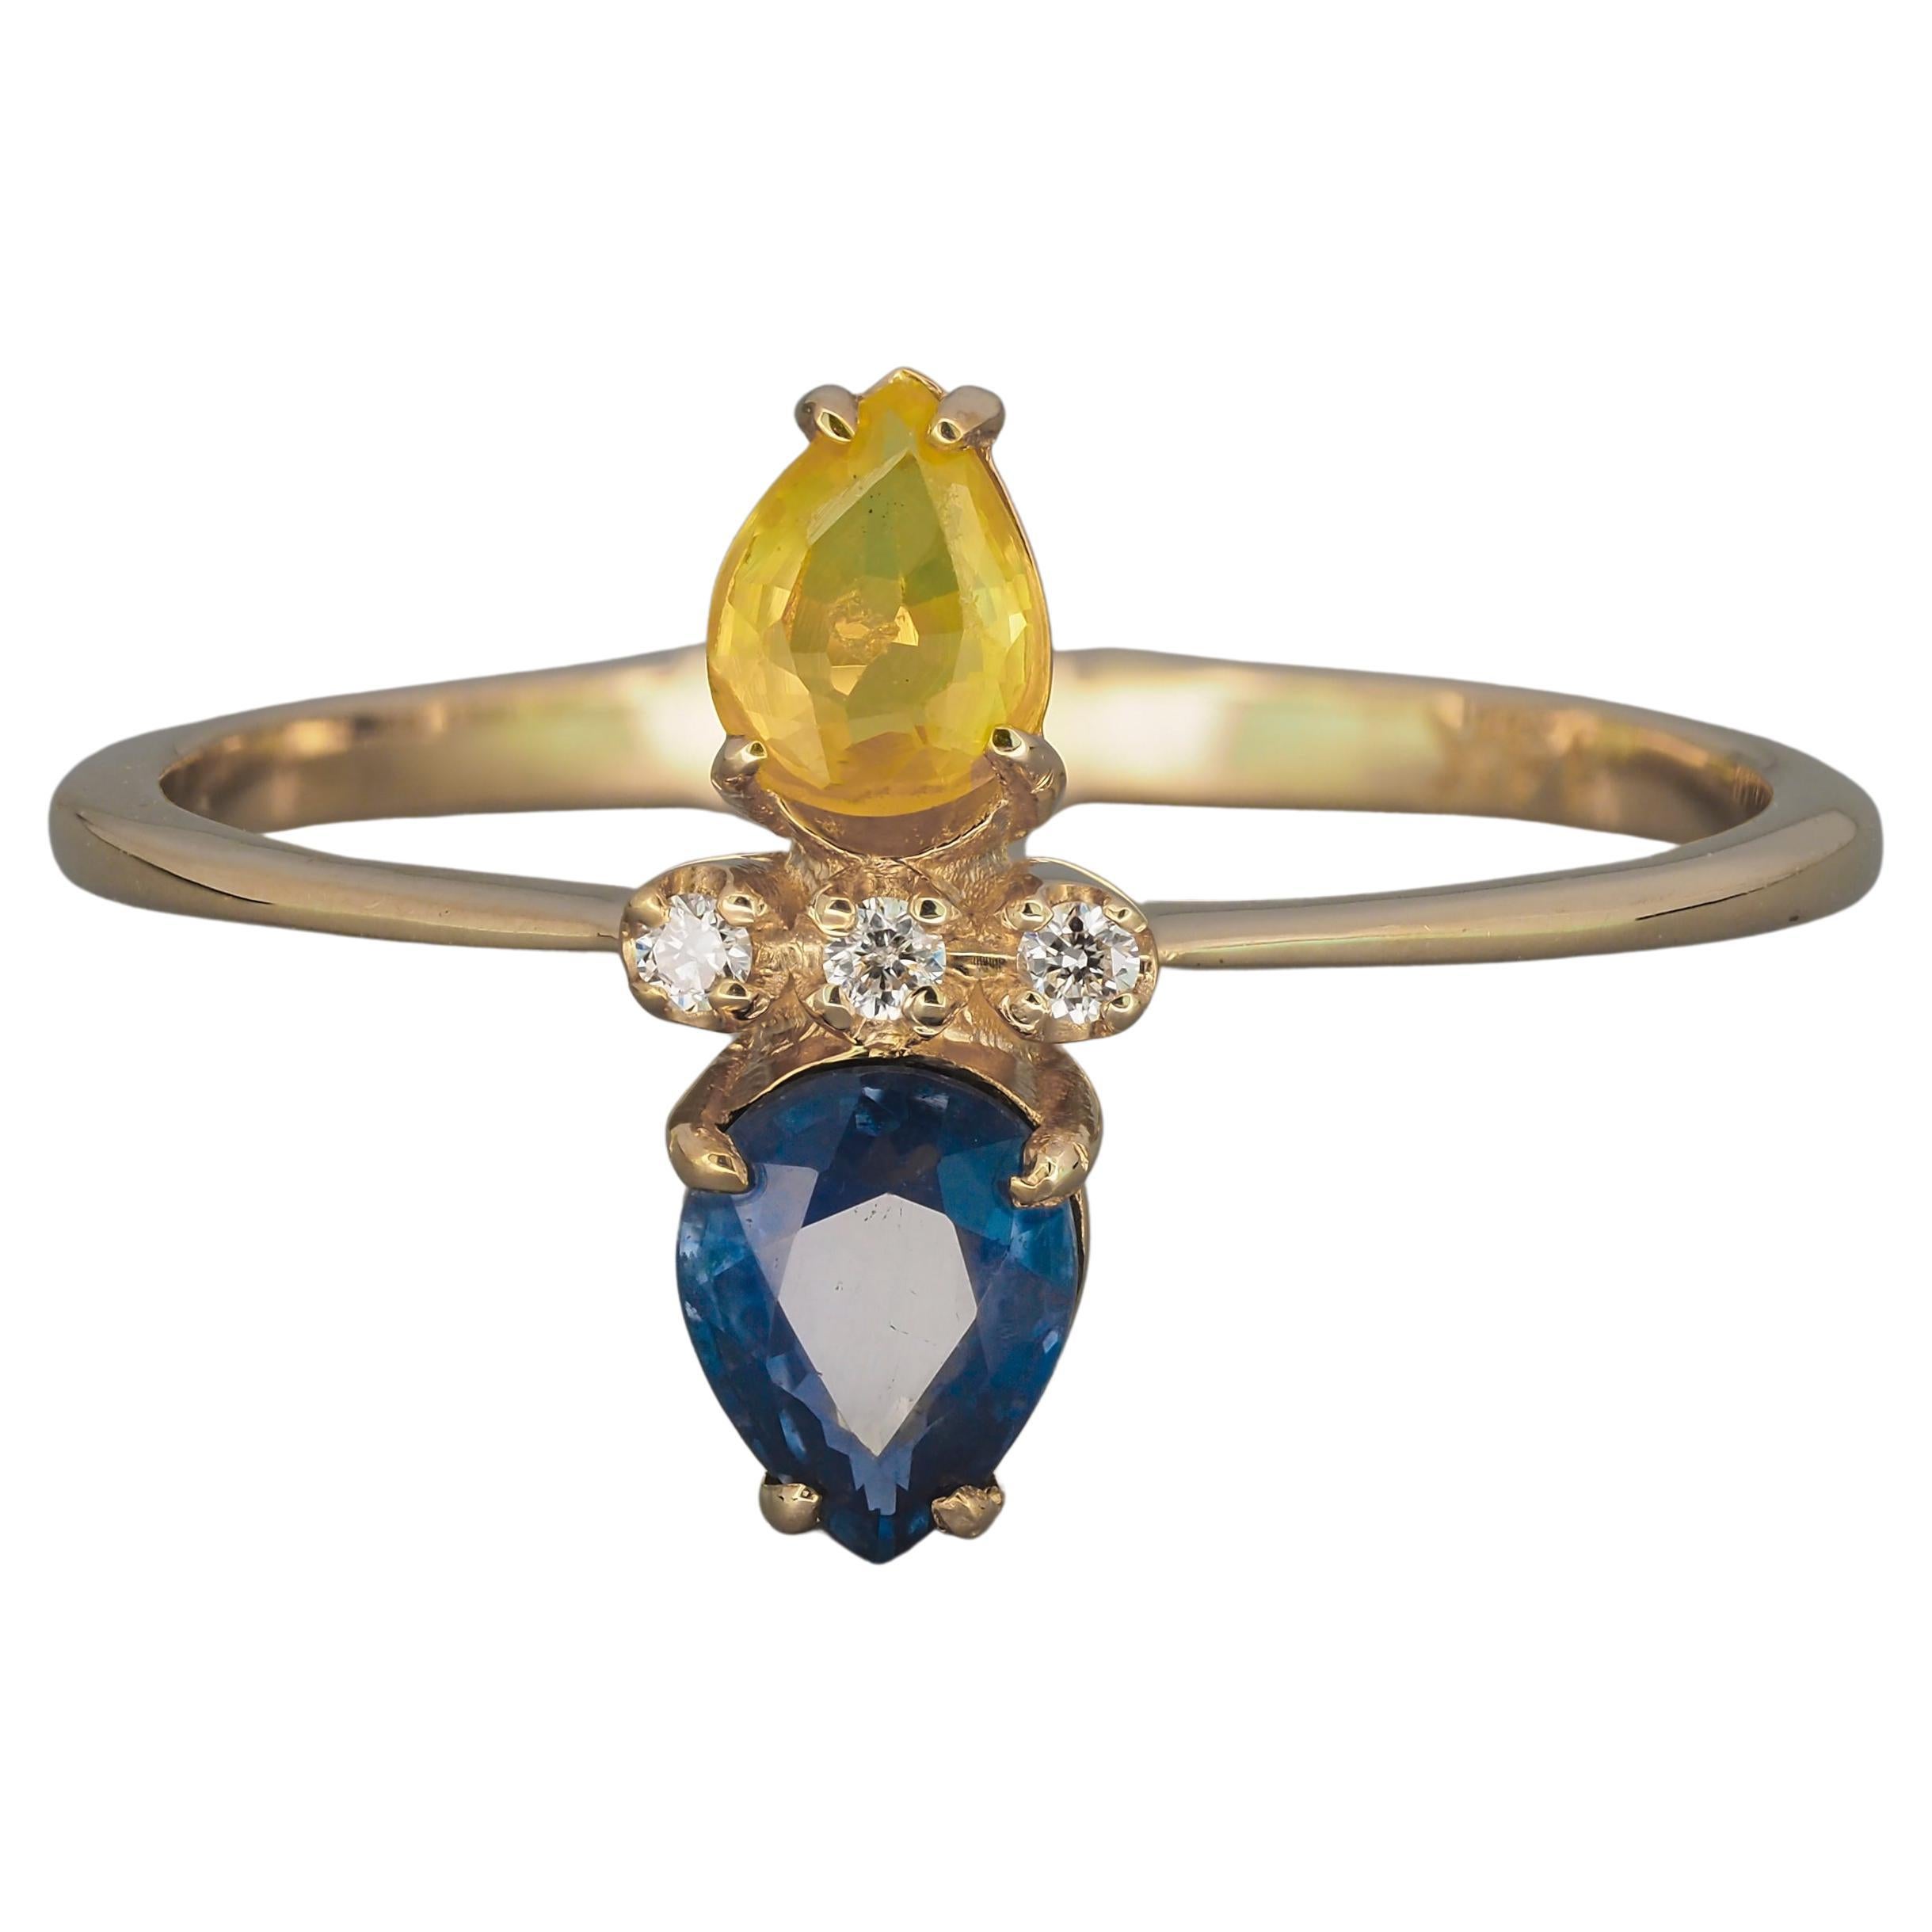 For Sale:  14k Gold Ring in Art Deco Style with Central Sapphires and Diamonds